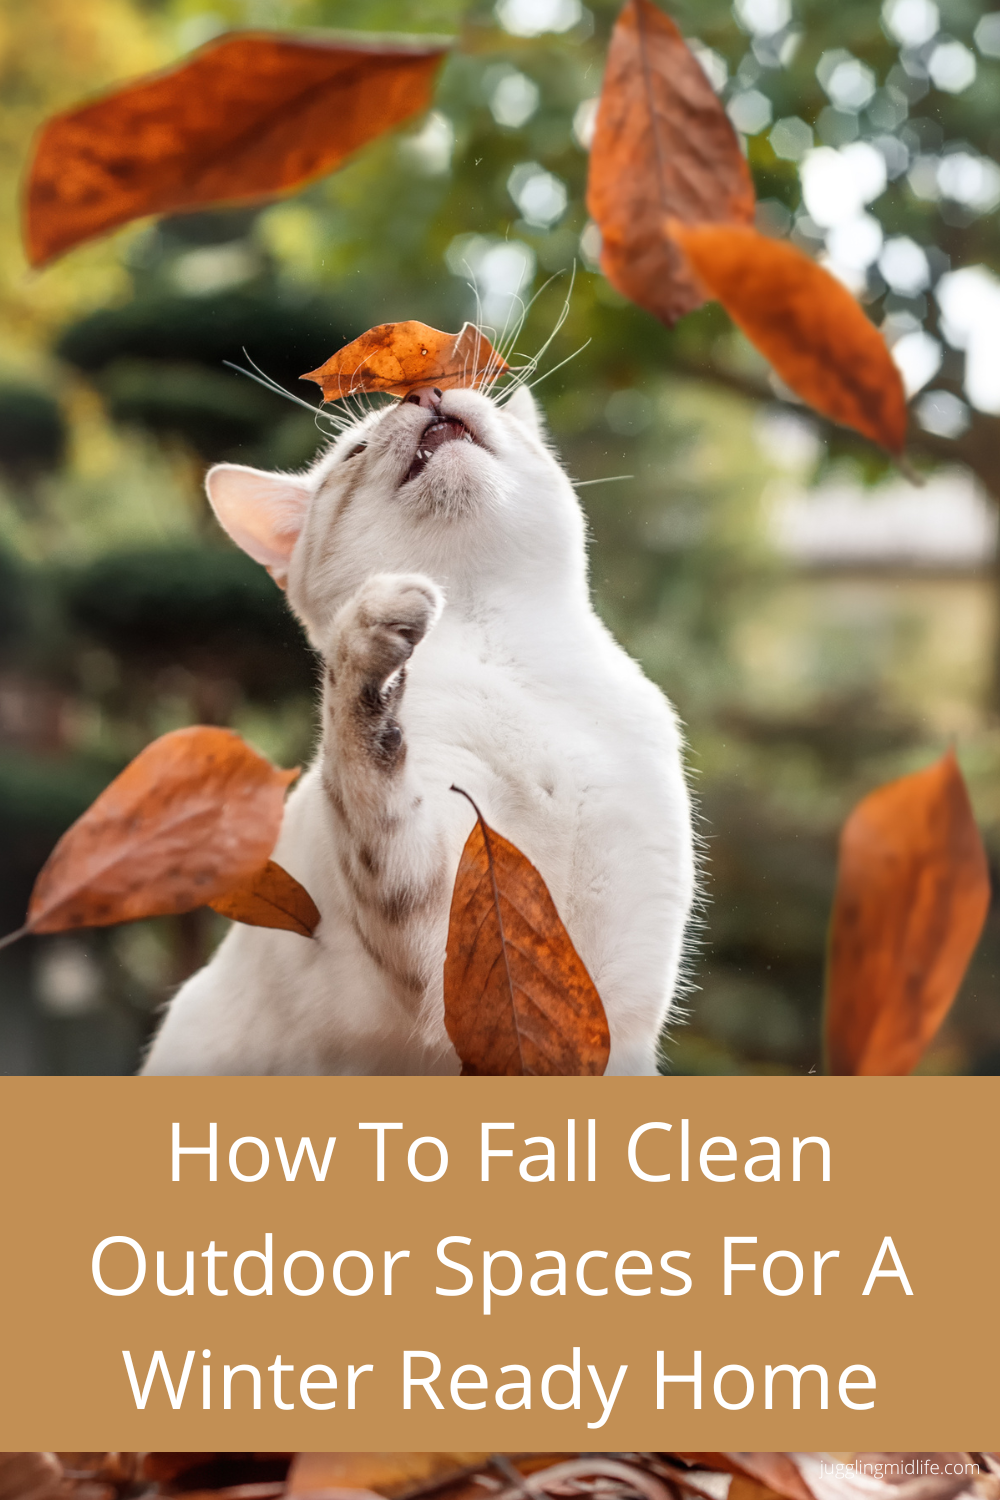 Fall cleaning outdoor spaces guide